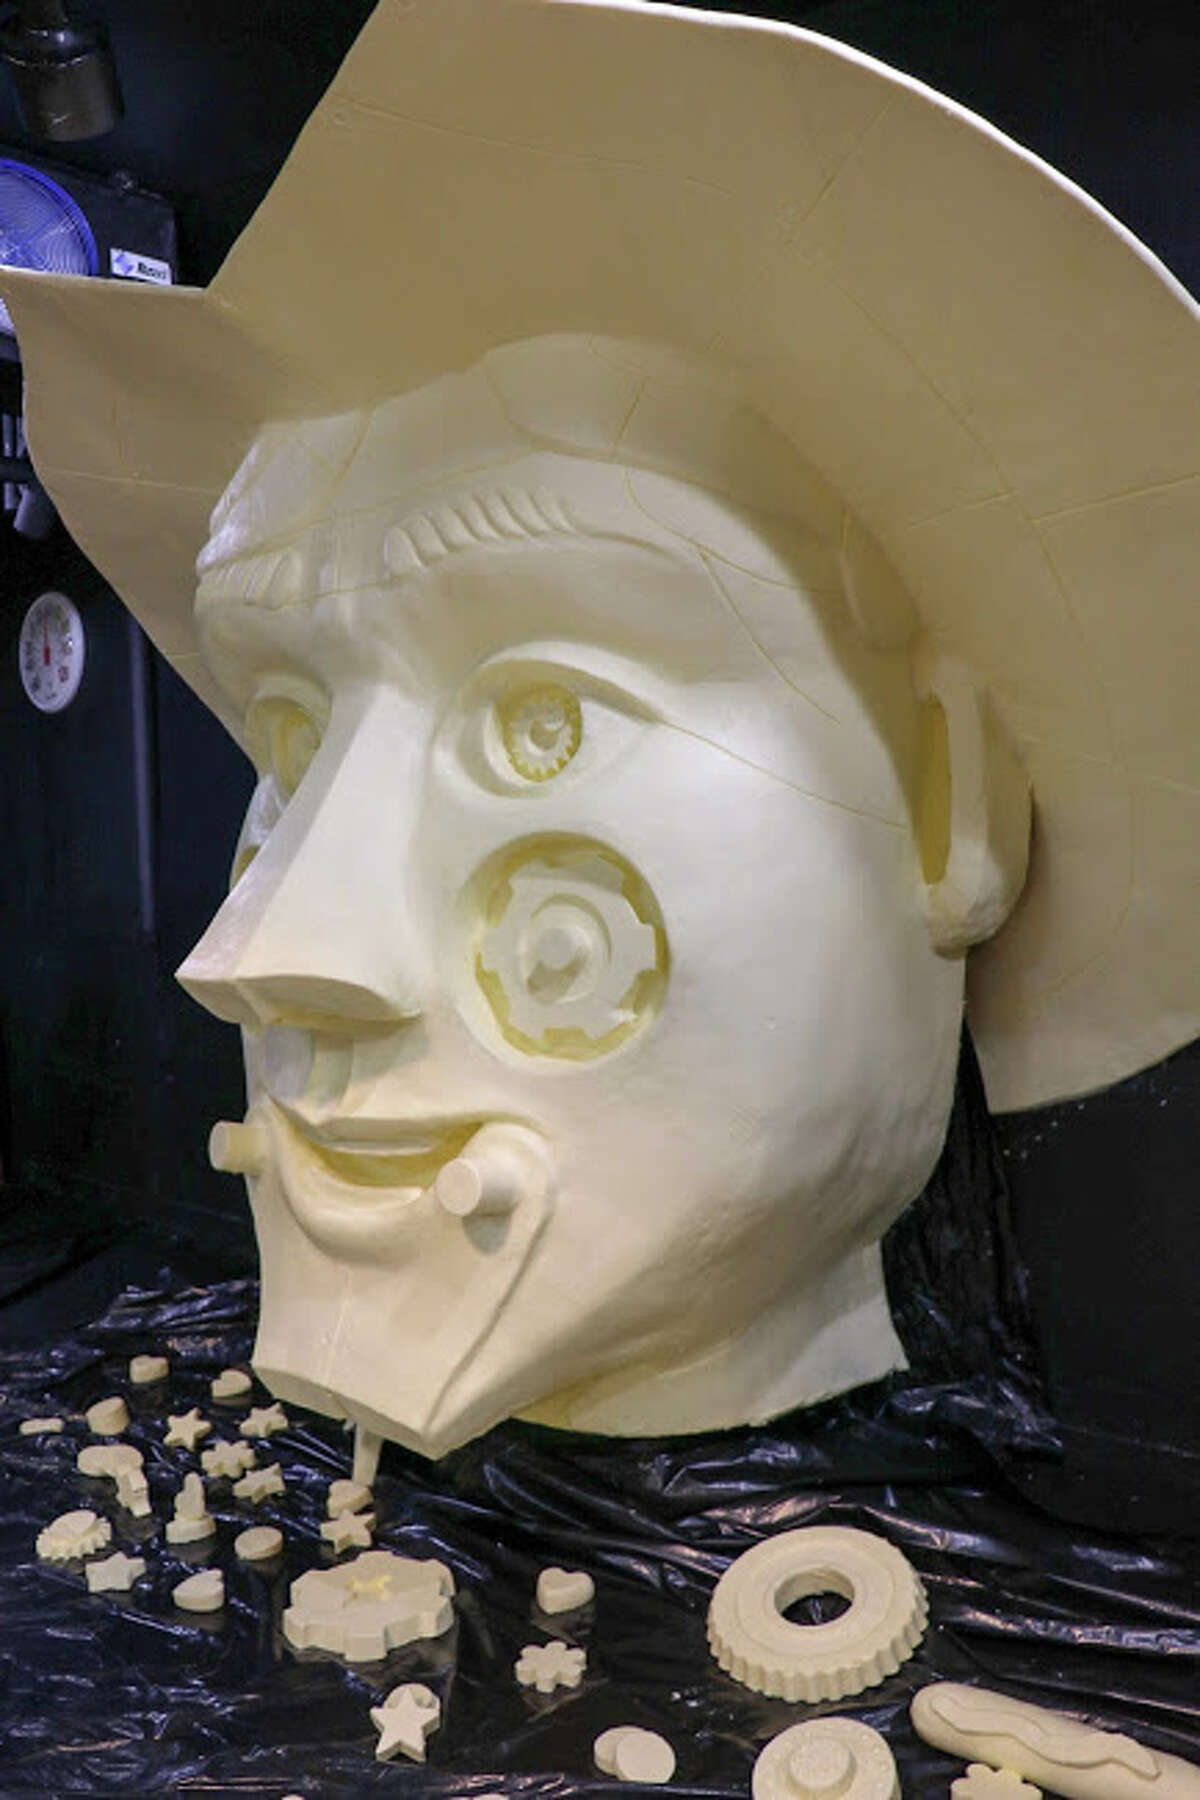 There's an 8foottall bust of BigTex made out of butter for the state